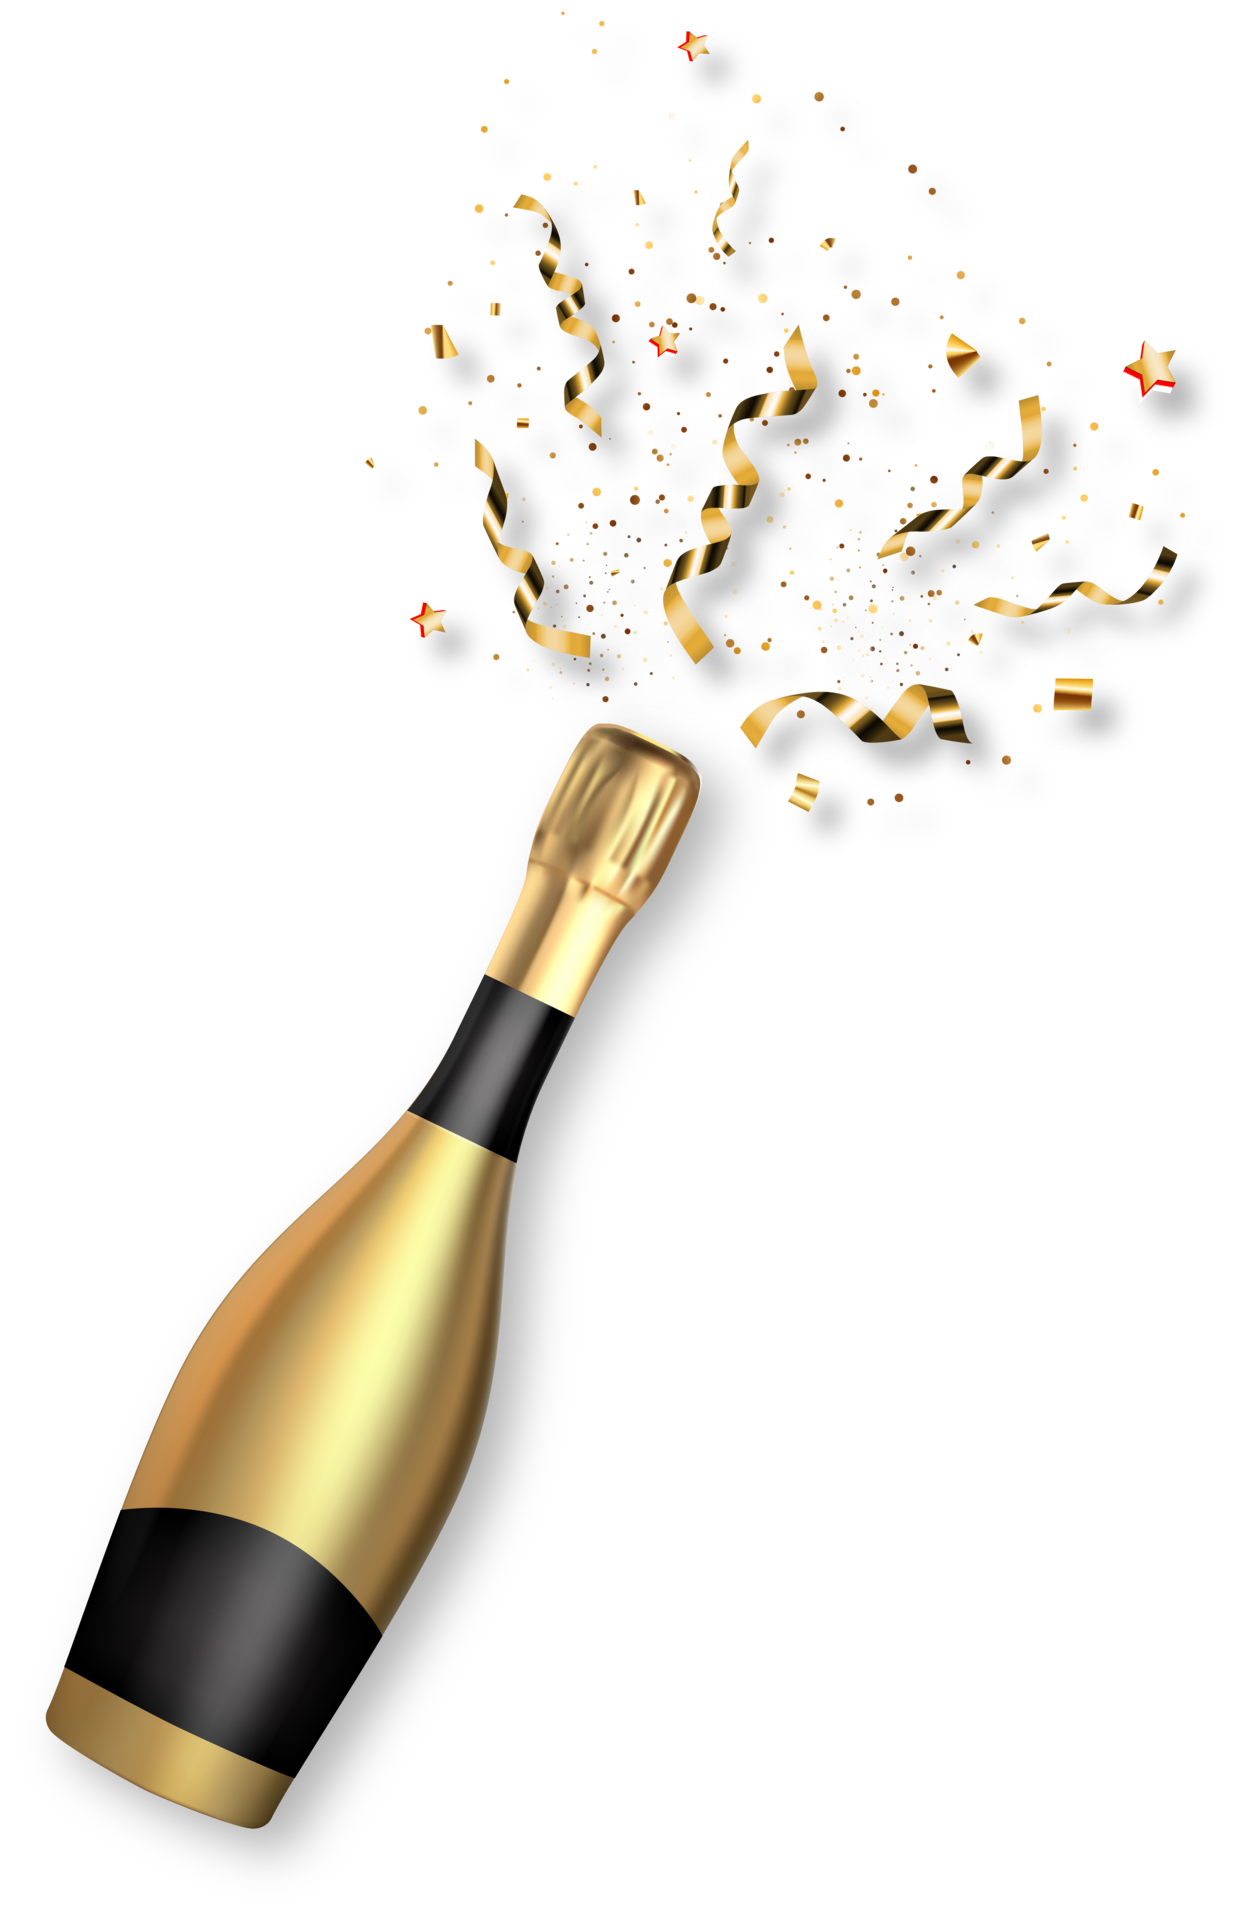 Champagne Bottle PNG HD Image